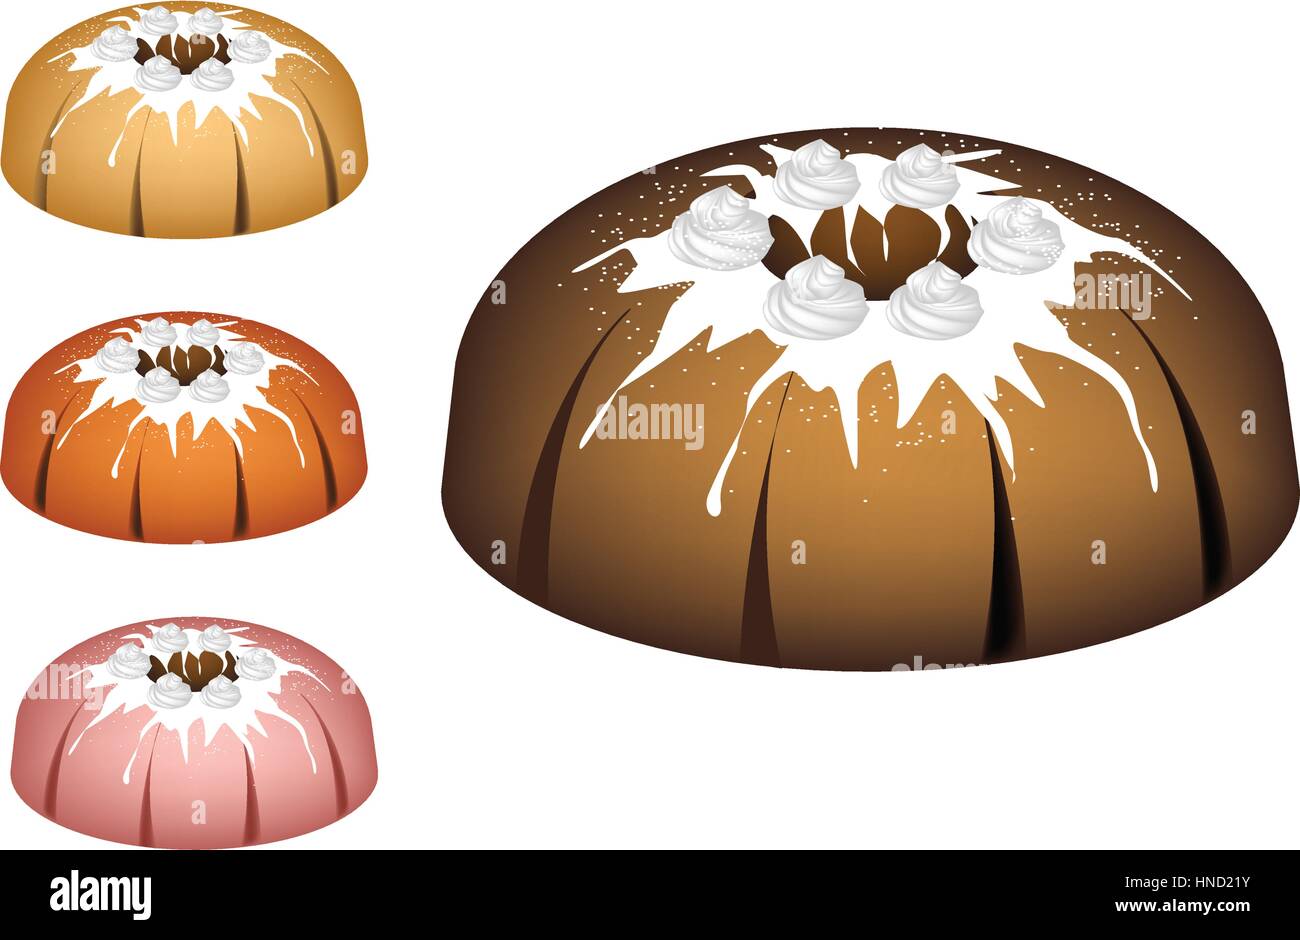 Illustration Set of Bundt Cake or Traditional Big Round Cake with Hole Inside, Mirror Glaze Coating and Icing for Holiday Dessert Isolated on White Ba Stock Vector